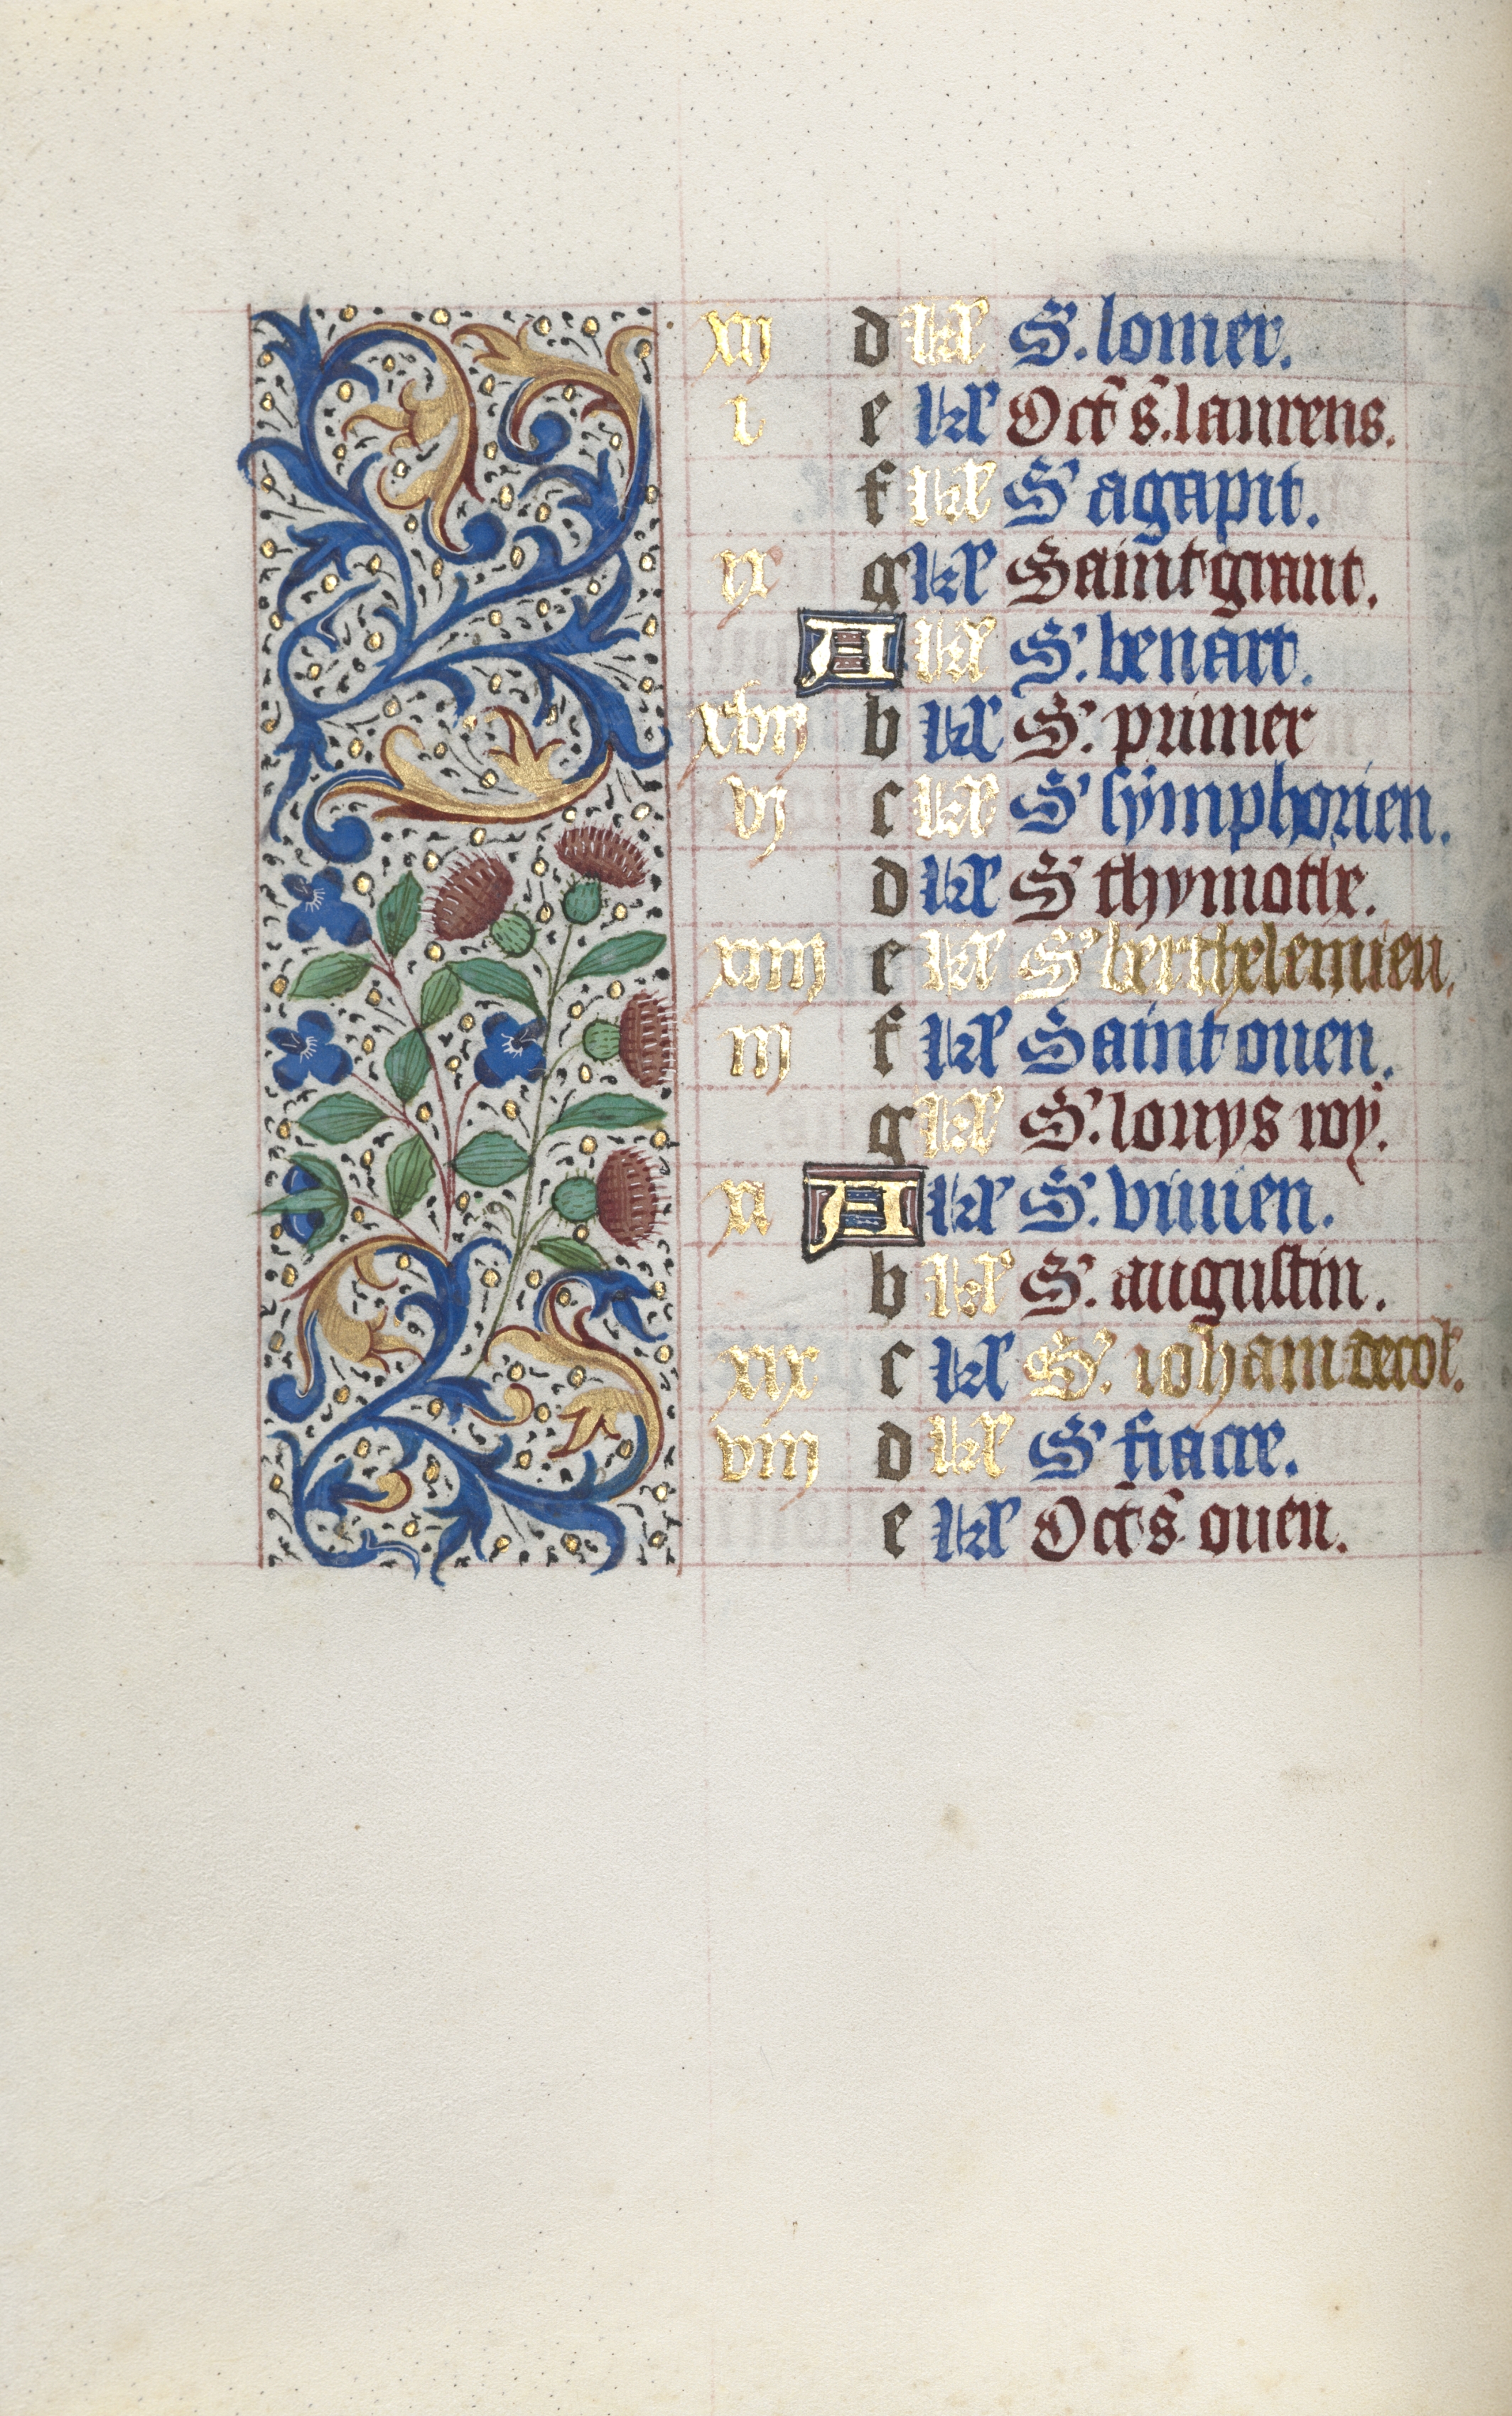 Book of Hours (Use of Rouen): fol. 8v